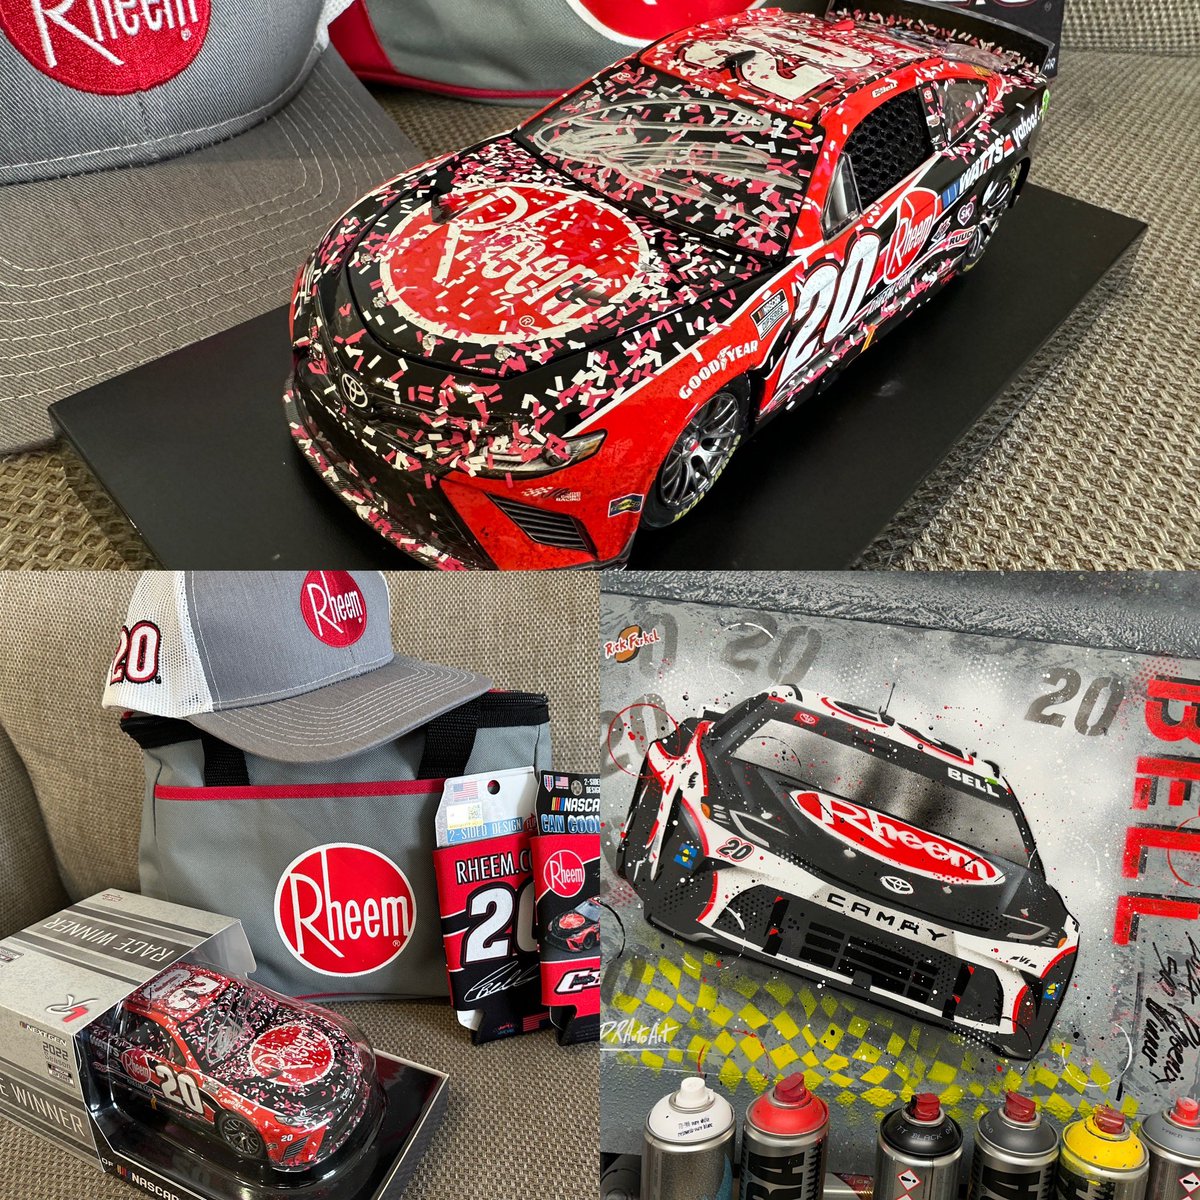 Massive thanks to the awesome @rheemracing team! Amazing to receive this package from the US. Your @cbellracing artwork is on the way. Much appreciated🙌🏻 #drautoart
(The detail on the signed diecast model is insane 😲)
.
#rheem #rheemracing #christopherbell #cb20 #nascar